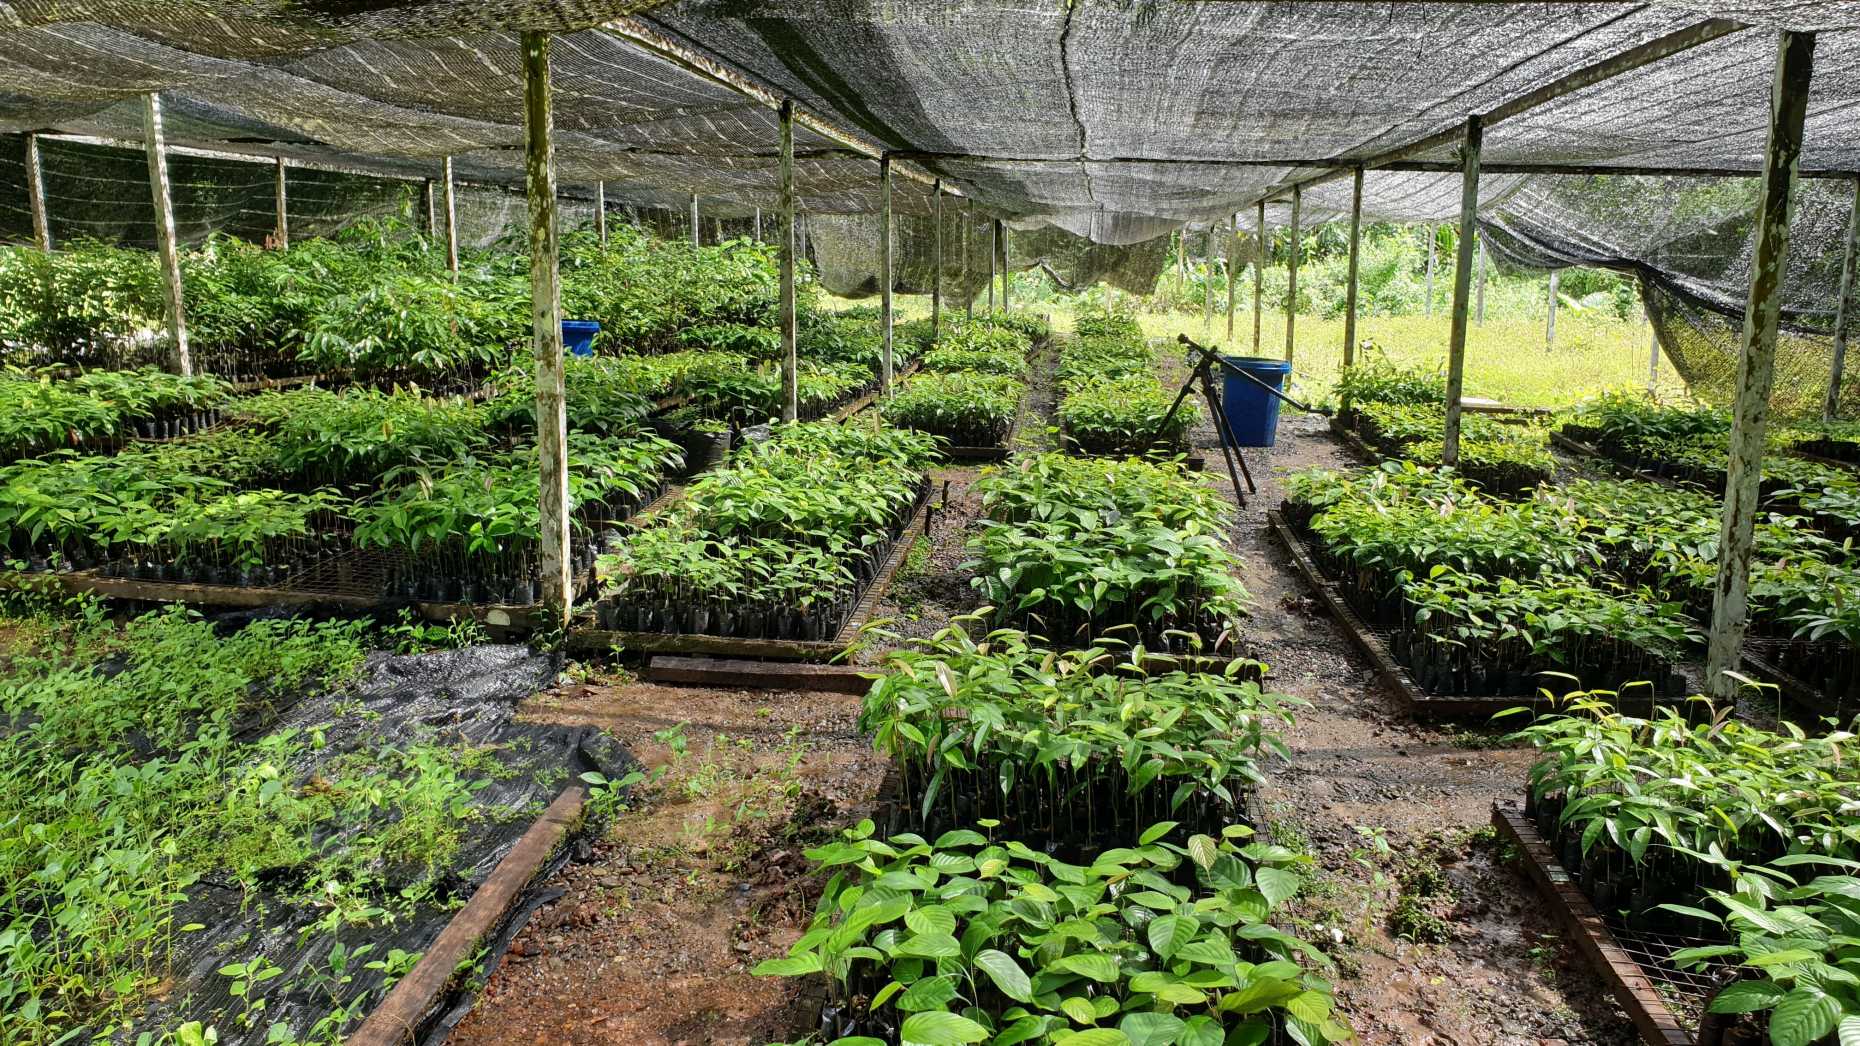 Dipterocarp seeds are collected in primary forest and grown in huge nursery’s to ensure there is sufficient planting material for restoration efforts. (Image: Michael O’Brien / SEARRP).